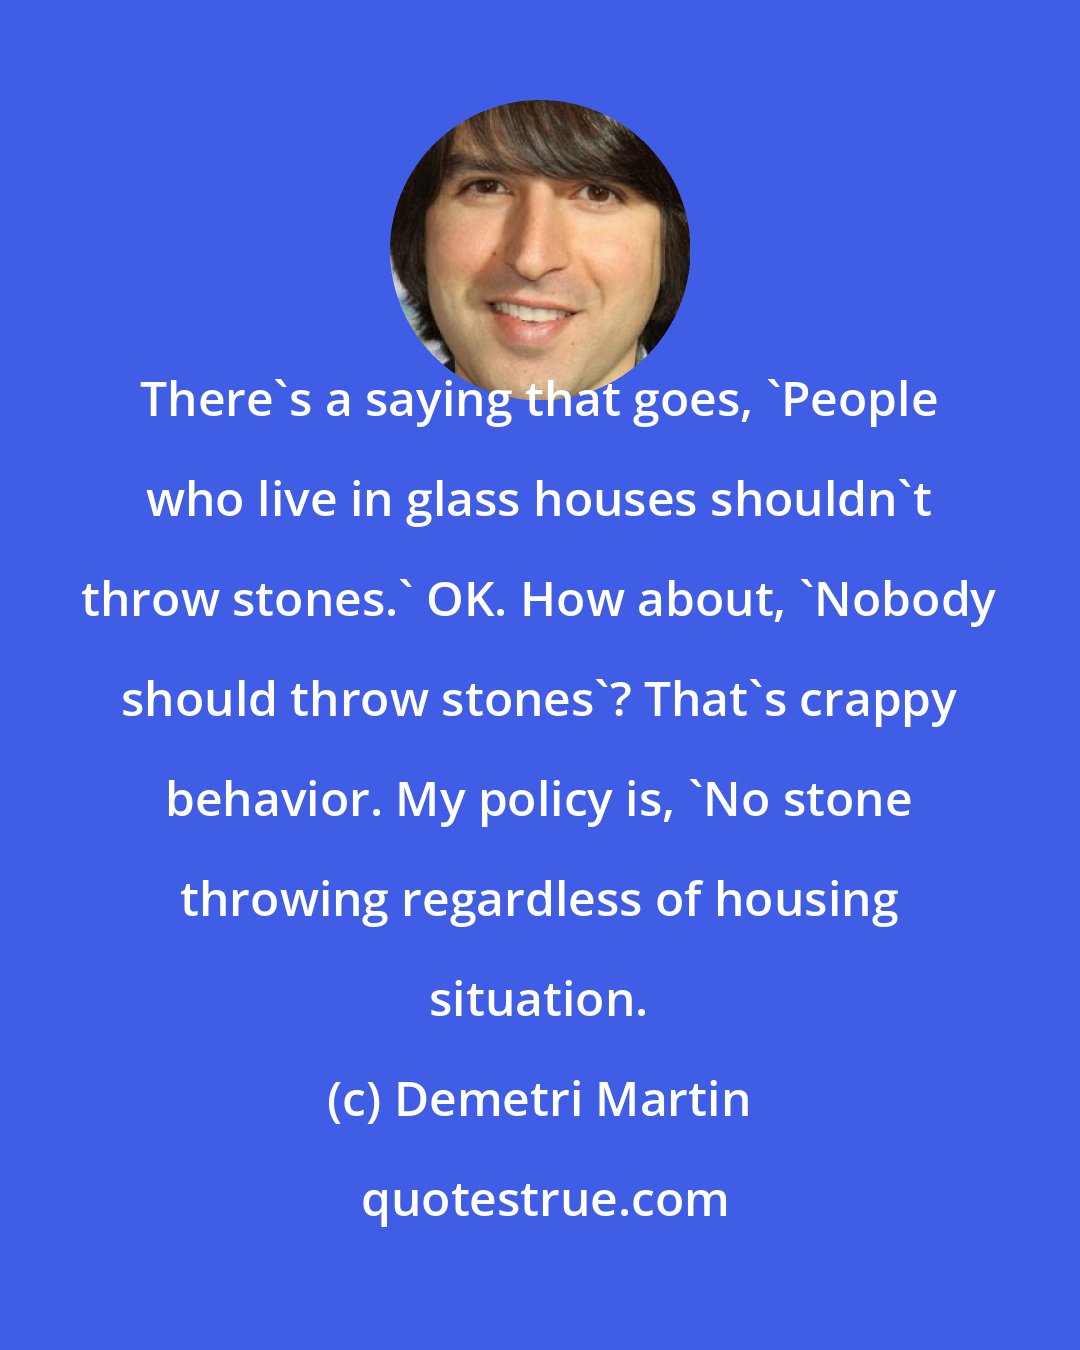 Demetri Martin: There's a saying that goes, 'People who live in glass houses shouldn't throw stones.' OK. How about, 'Nobody should throw stones'? That's crappy behavior. My policy is, 'No stone throwing regardless of housing situation.